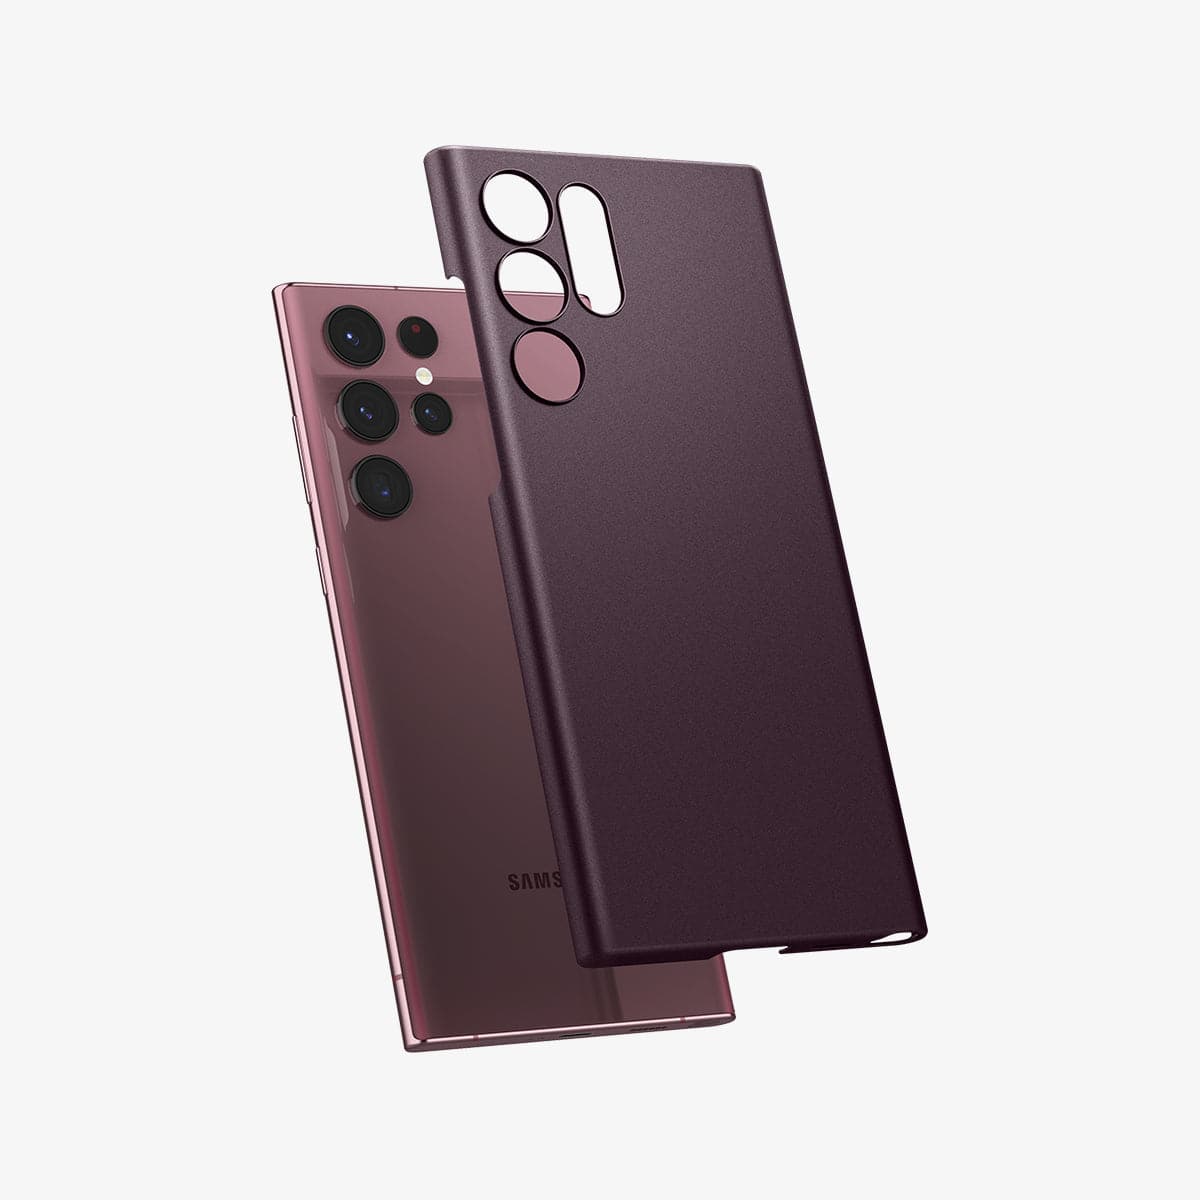 ACS04384 - Galaxy S22 Ultra 5G Case AirSkin in plum burgundy showing the back with case hovering away from device